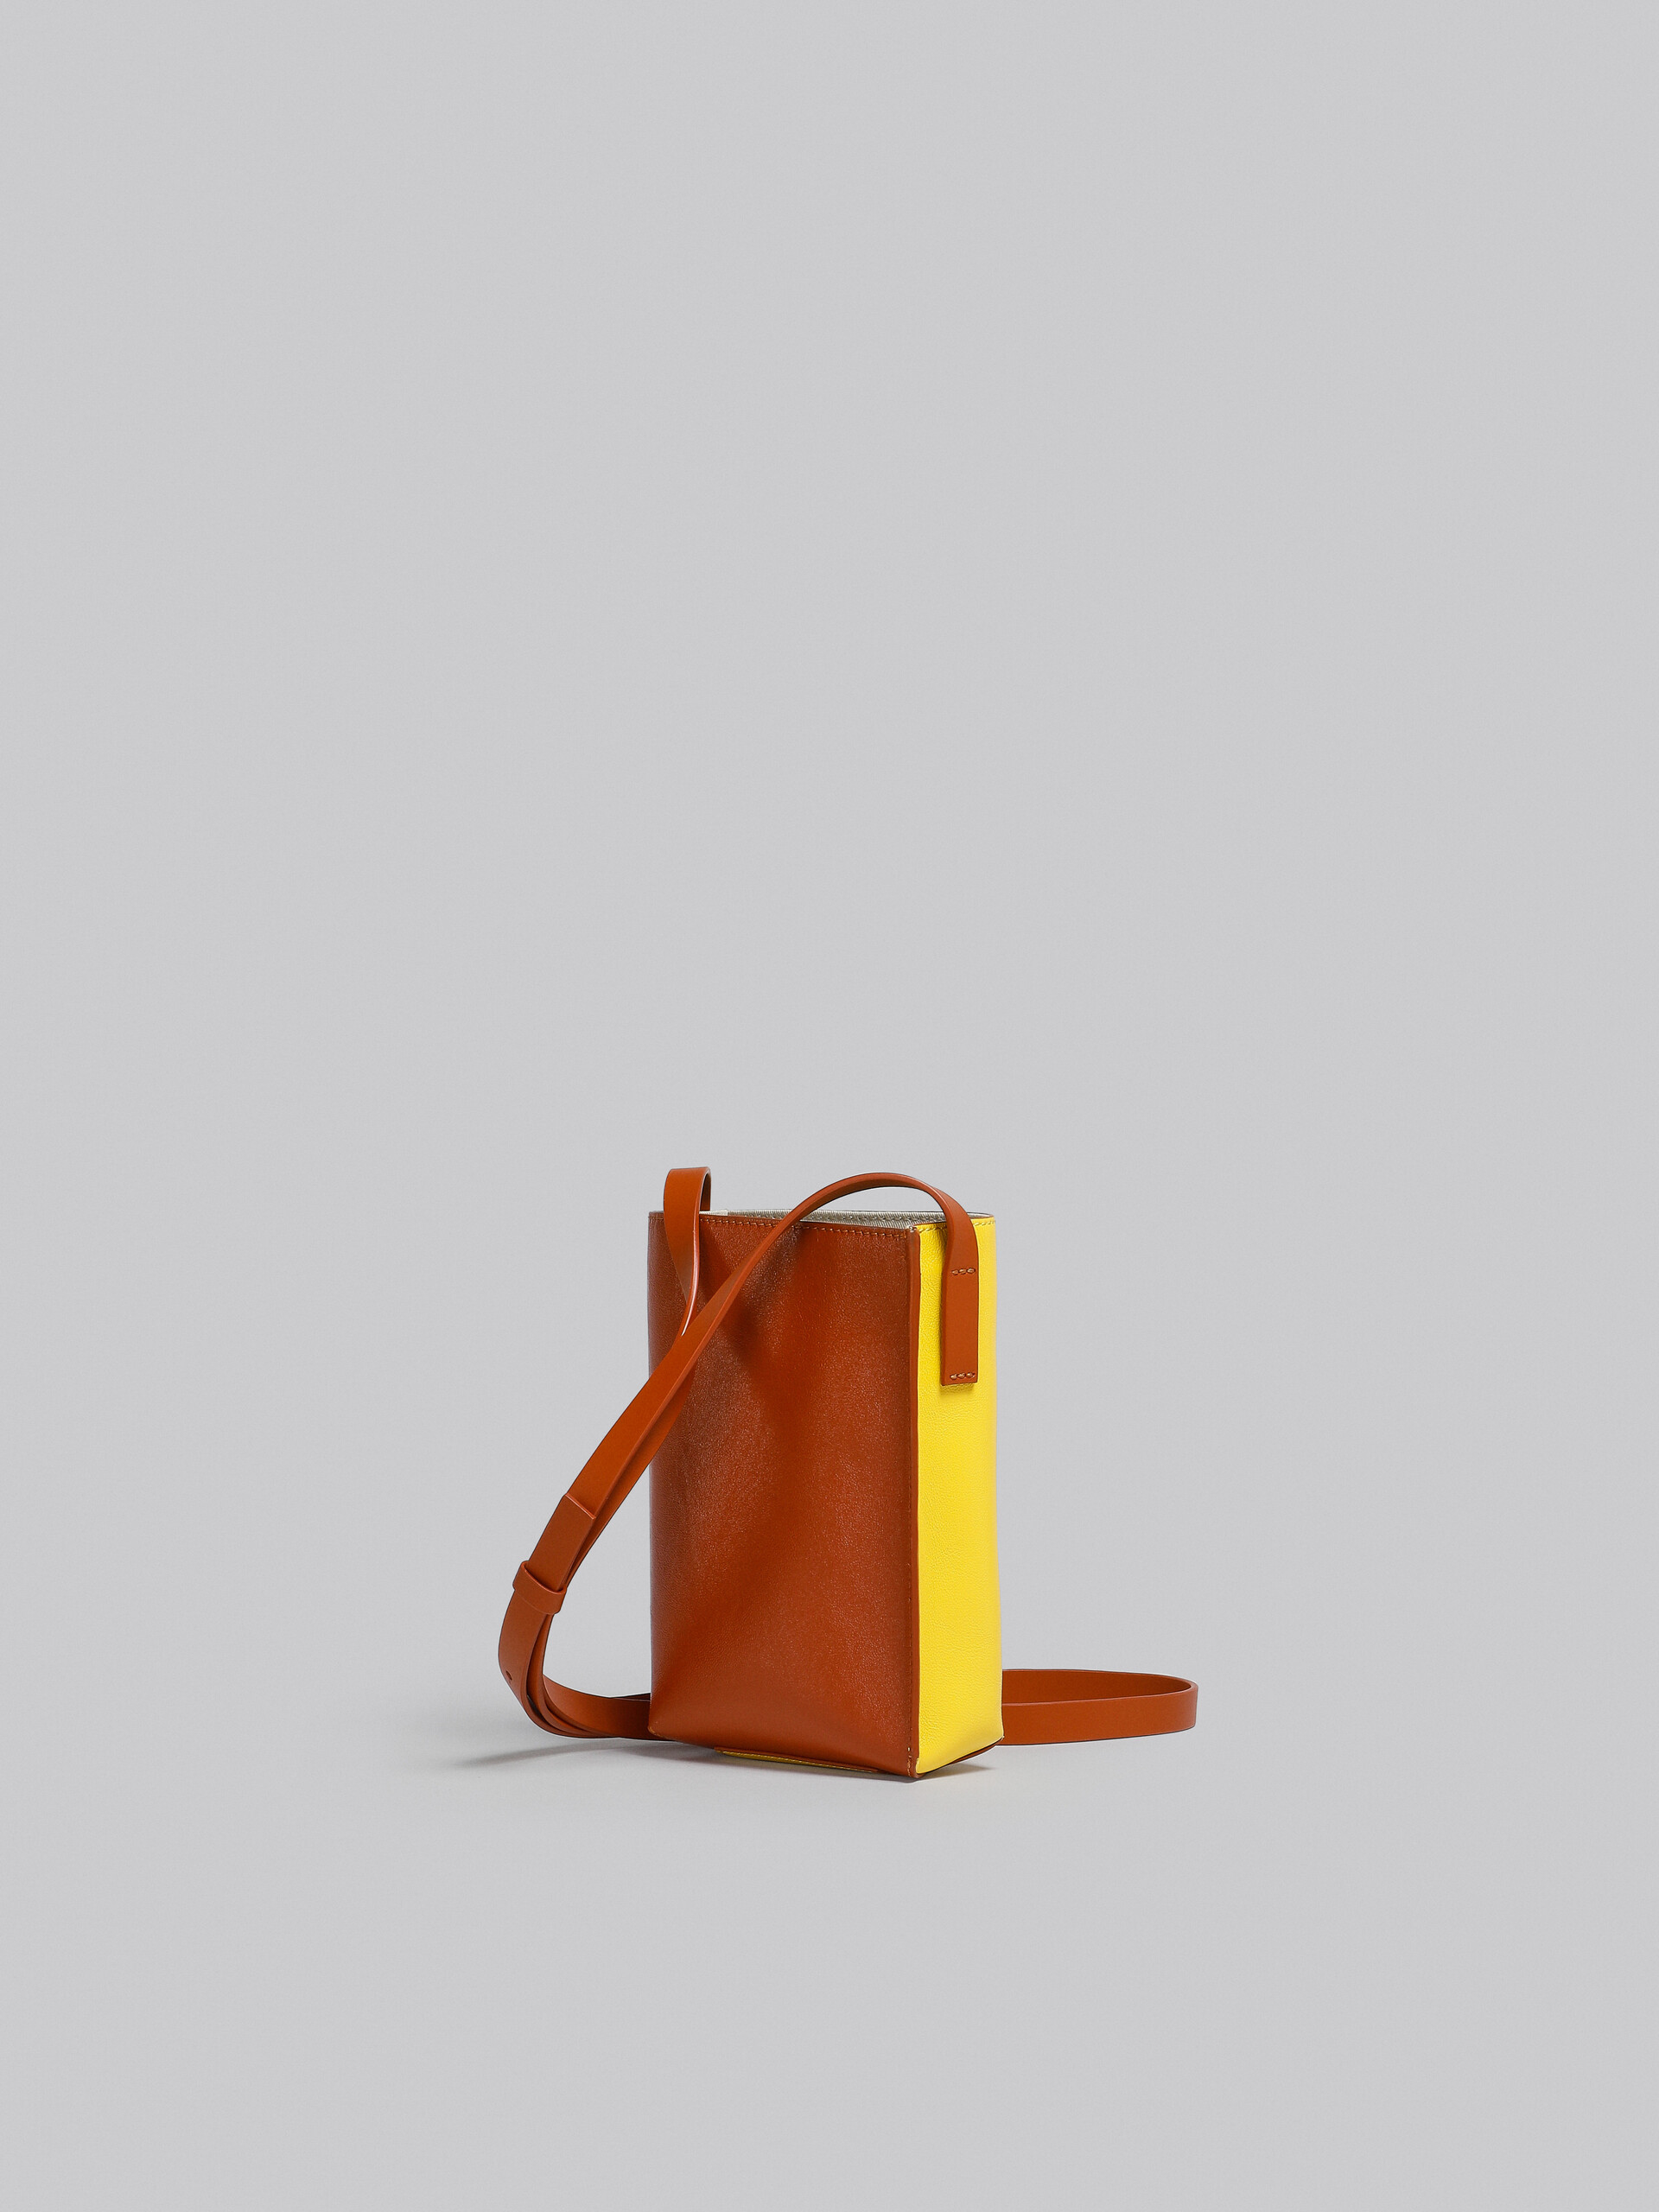 MUSEO SOFT small bag in brown and yellow leather - Shoulder Bags - Image 3